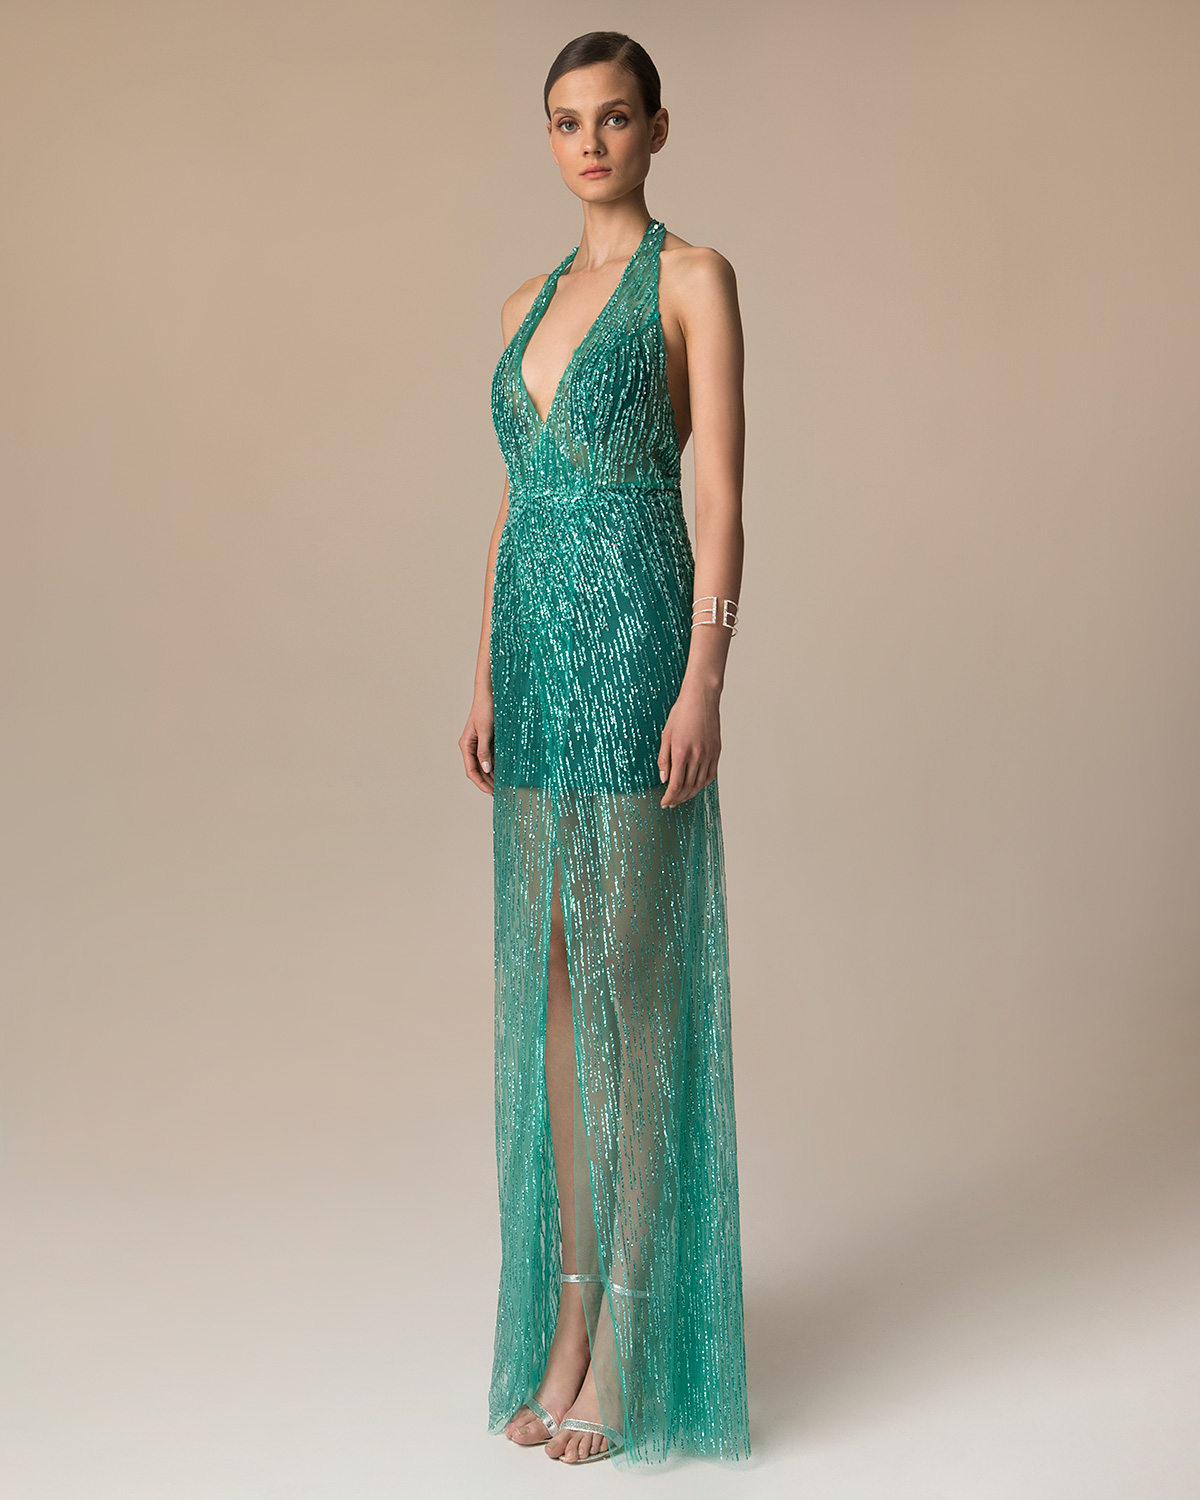 Evening Dresses / Long evening fully beaded dress with open back